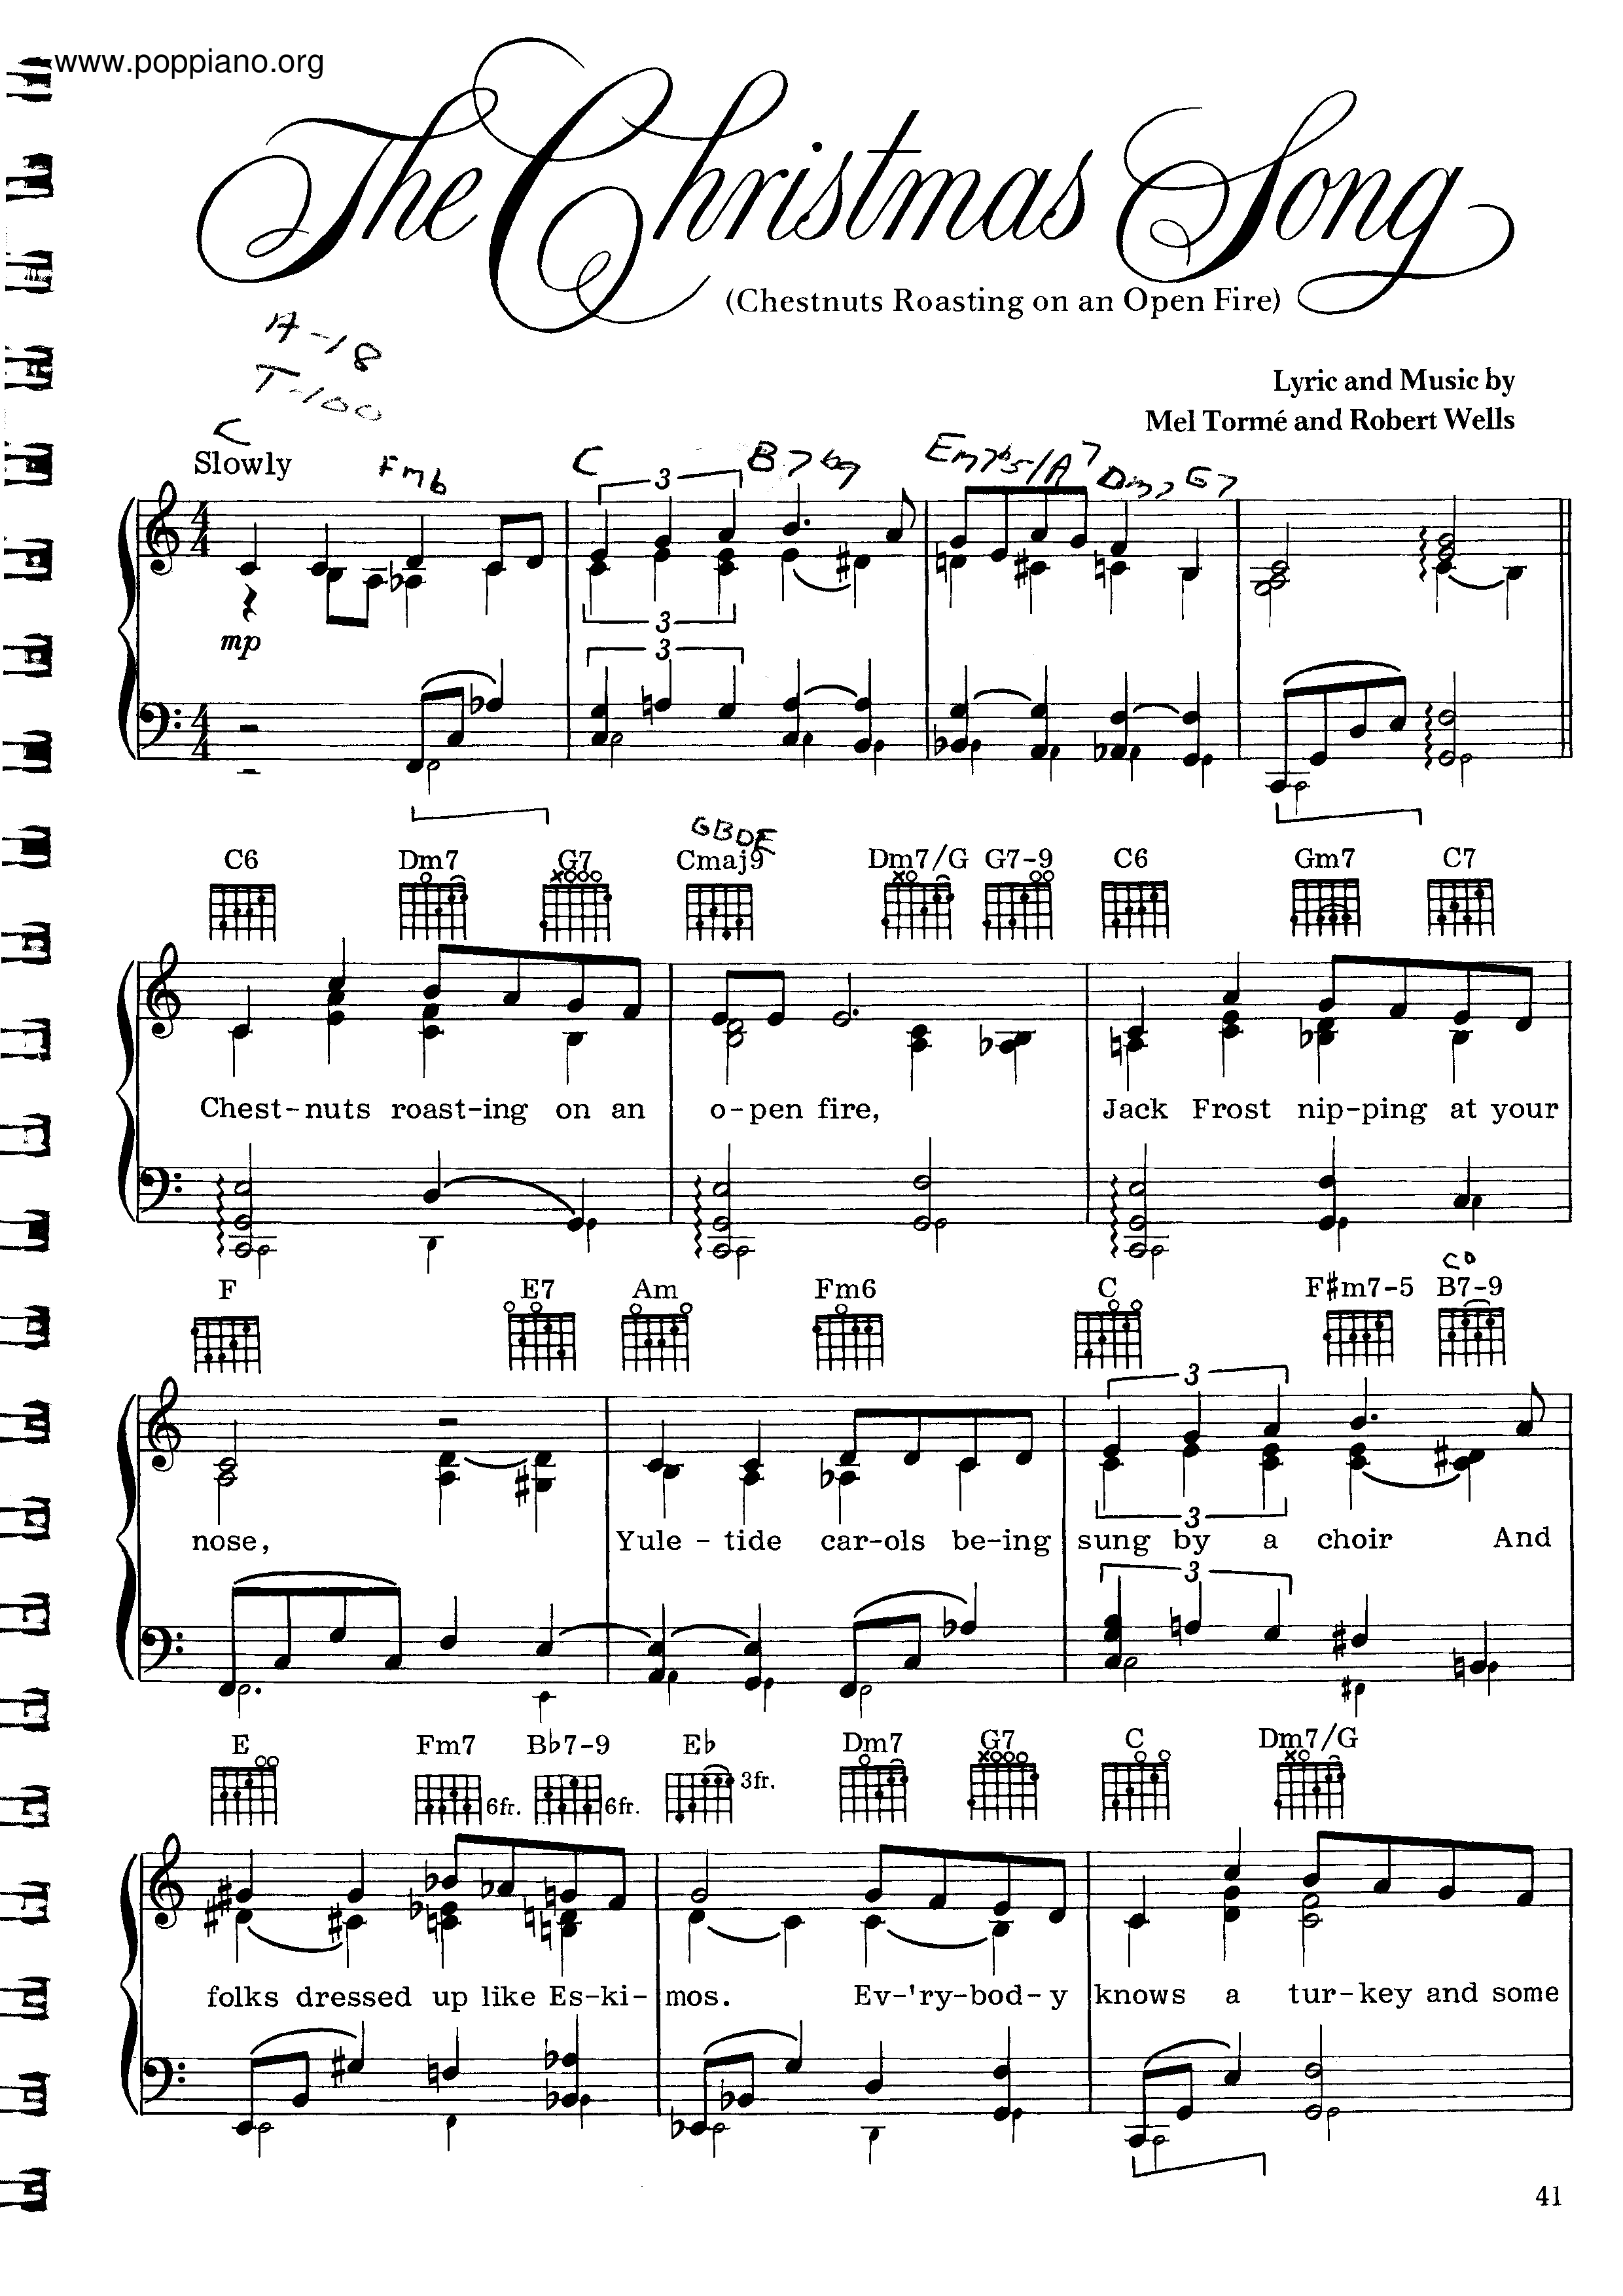 The Christmas Song Score